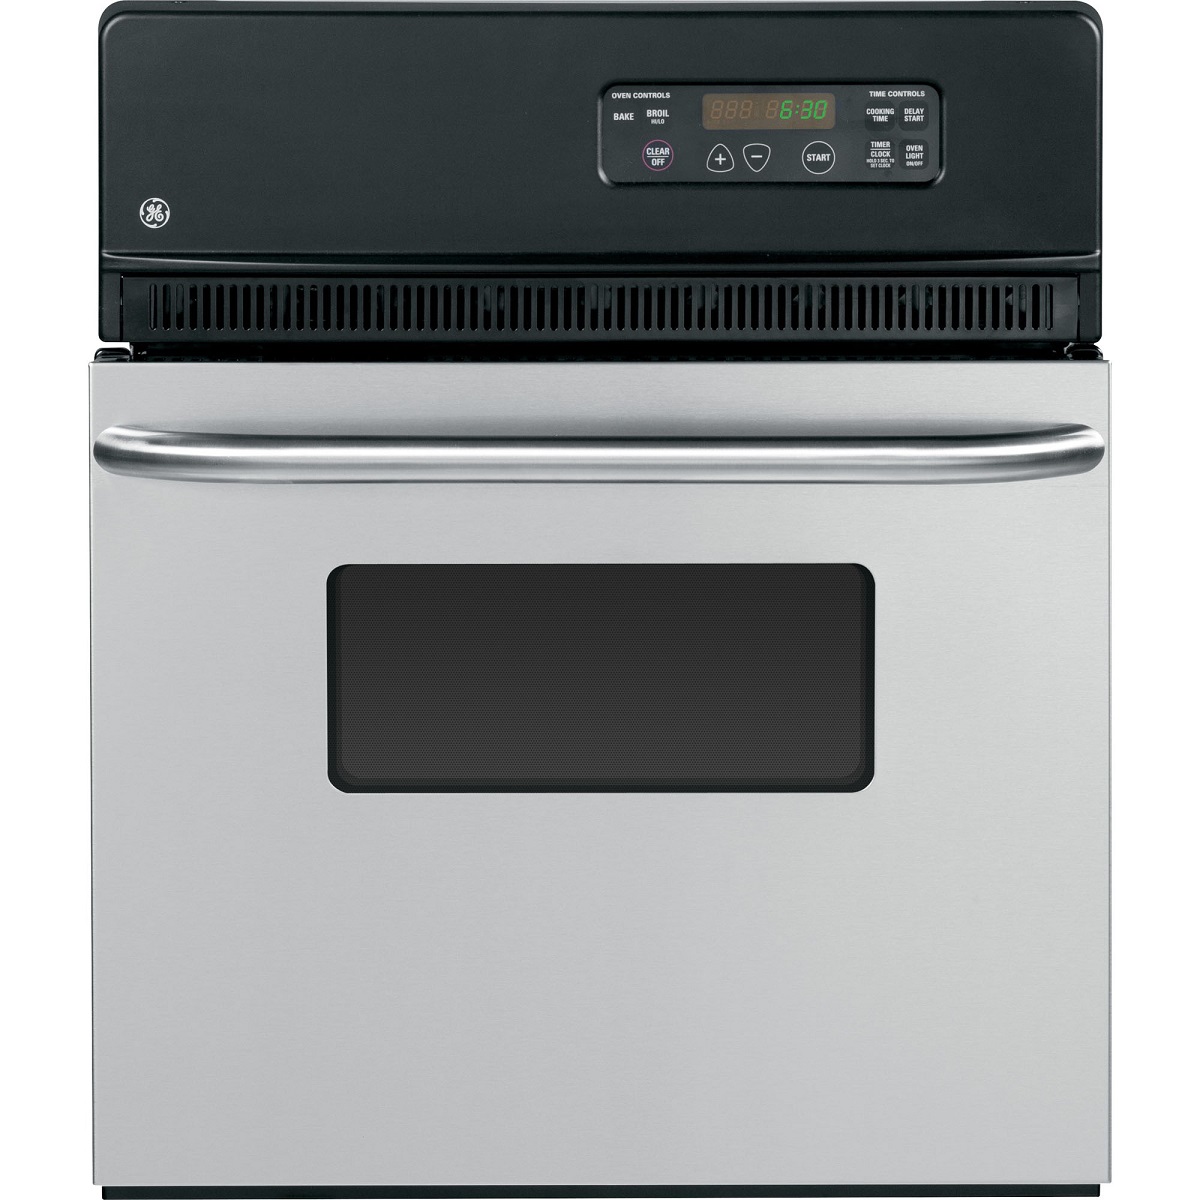 14 Amazing Sears 24 Inch Wall Ovens for 2023